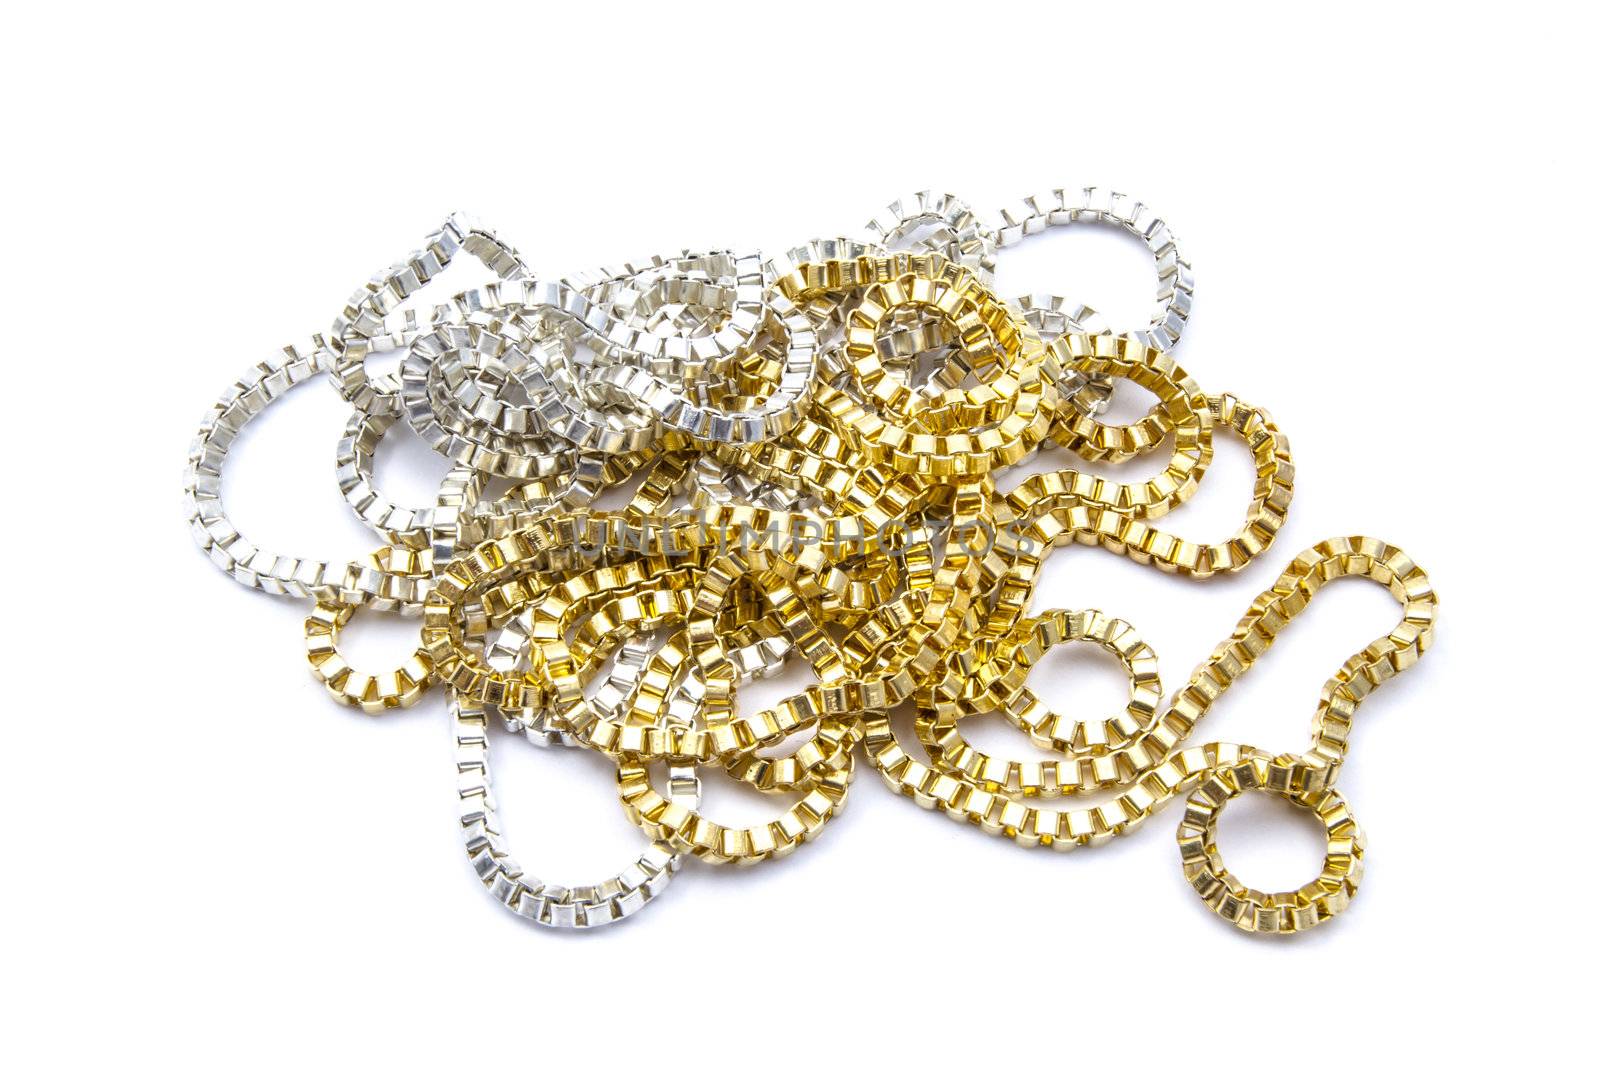 Silver and gold necklaces by ibphoto